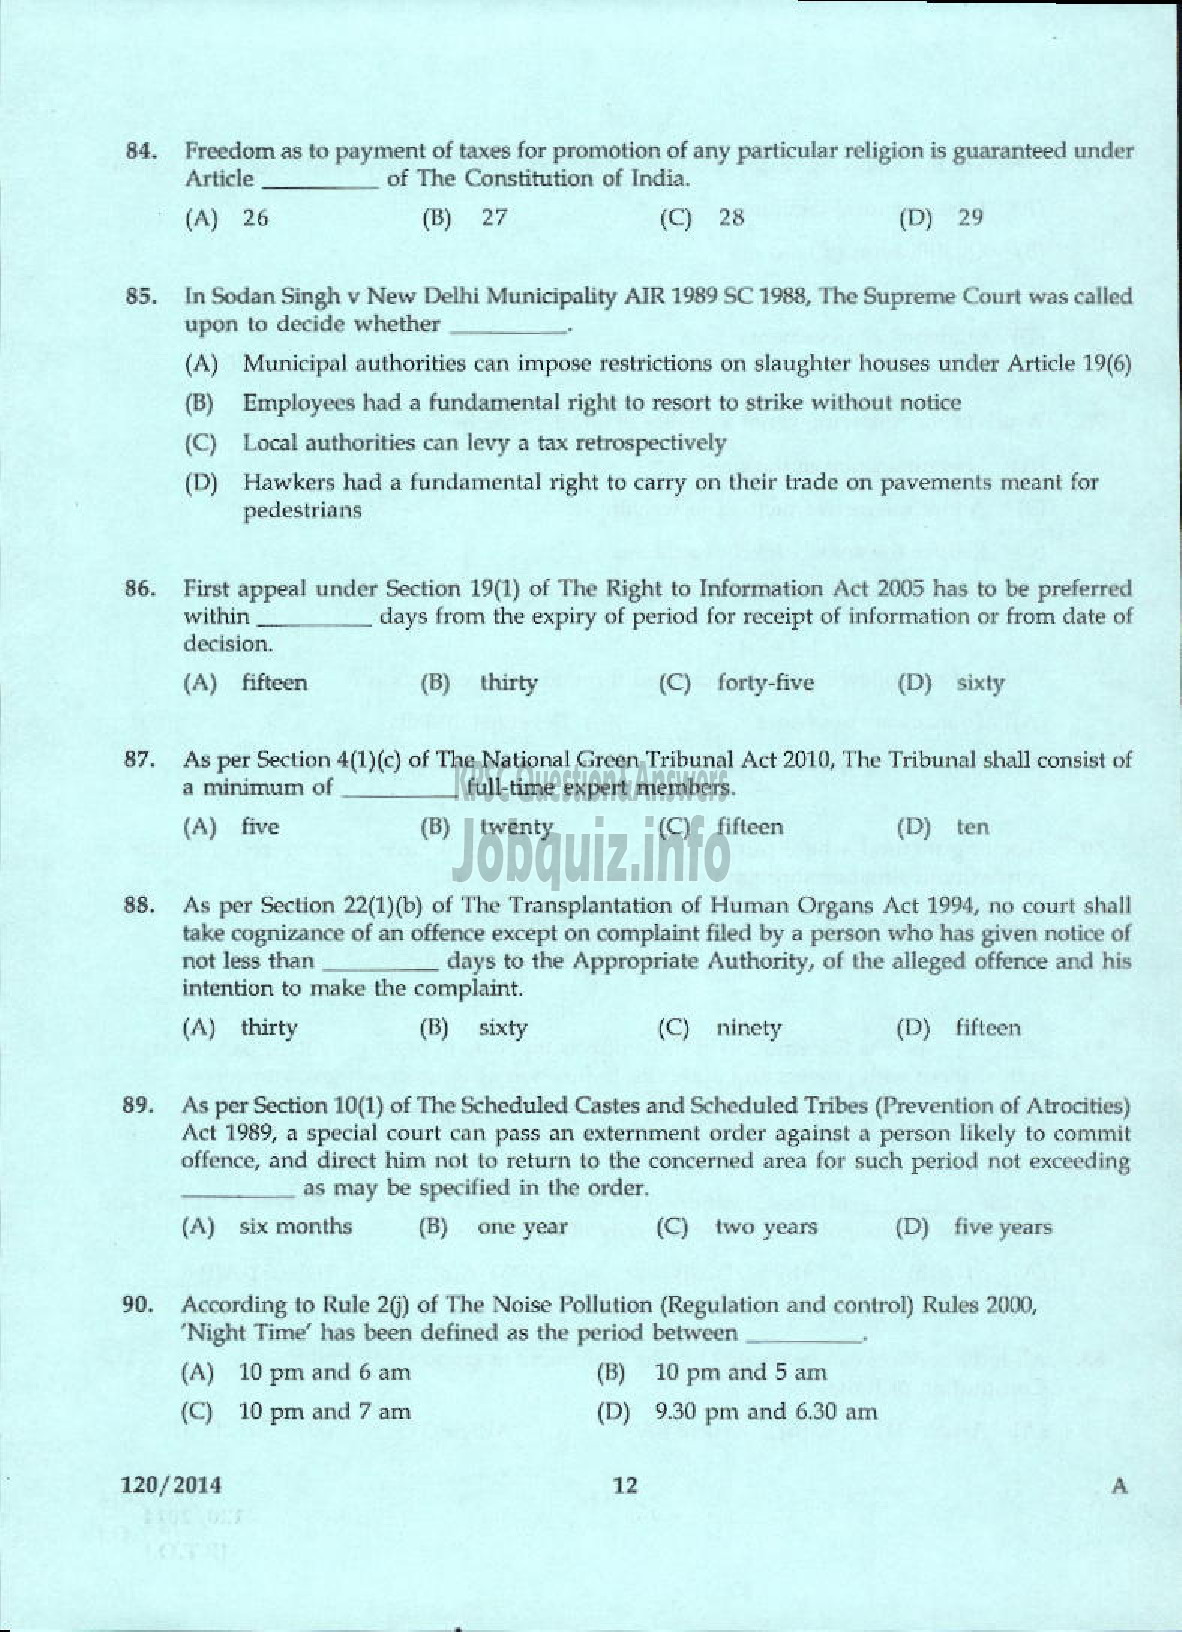 Kerala PSC Question Paper - LECTURER IN GEOGRAPHY KERALA COLLEGIATE EDUCATION-10